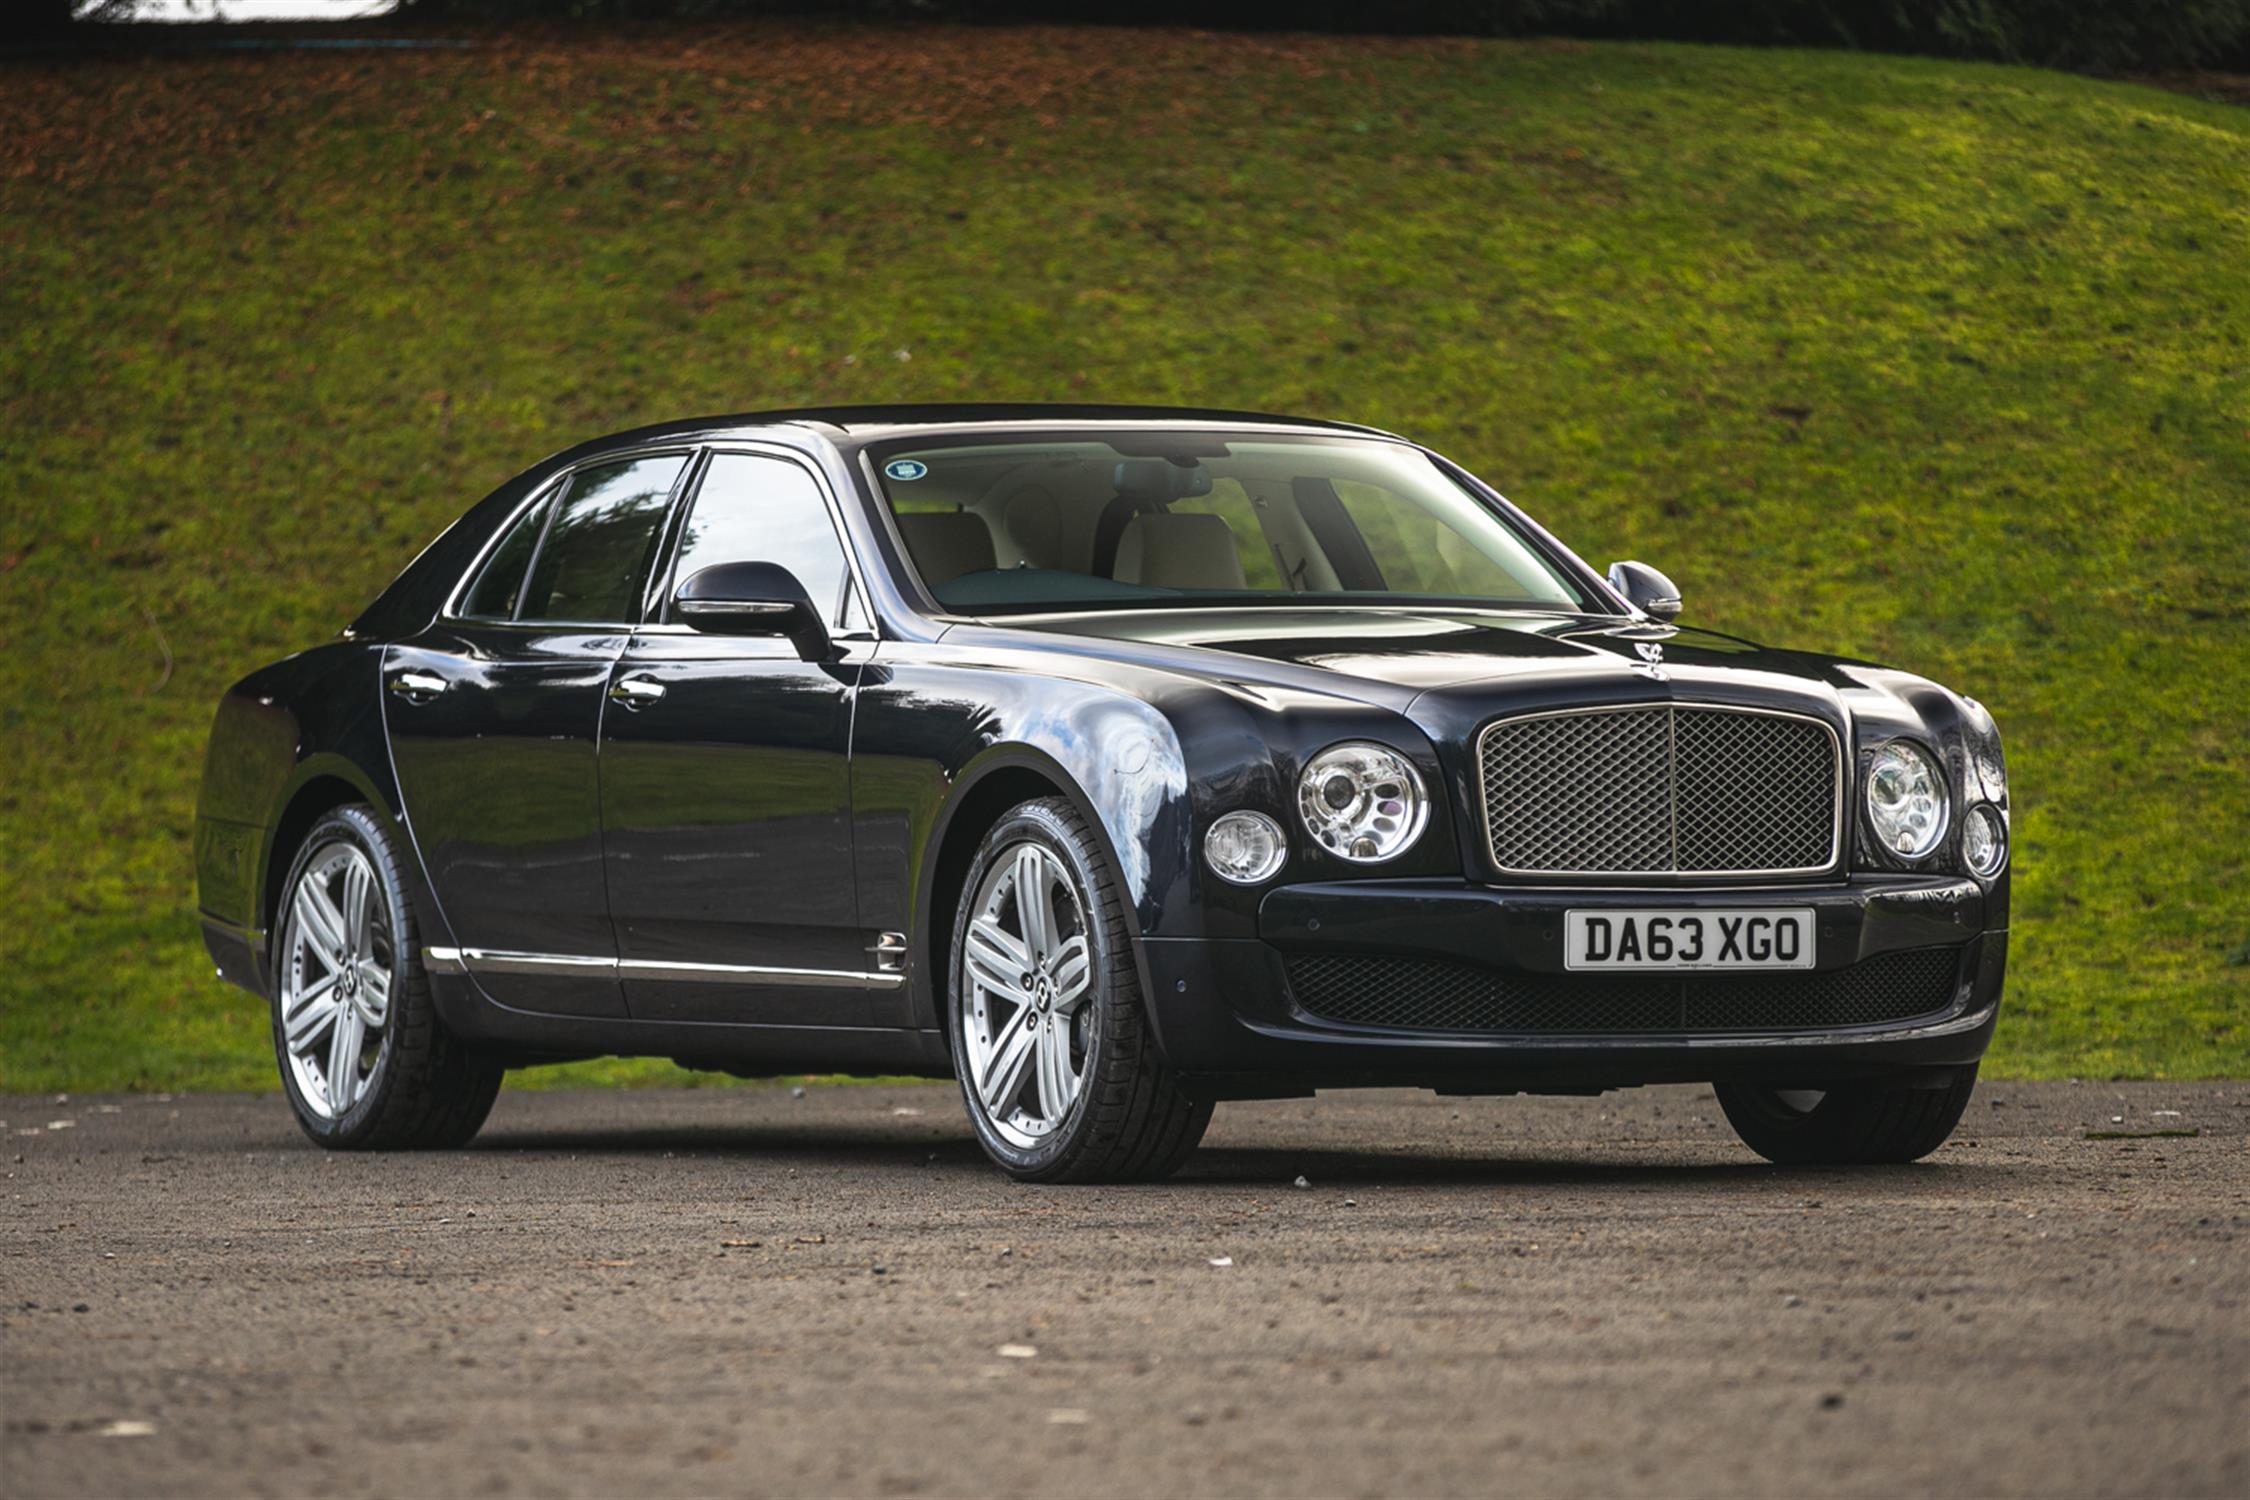 2013 Bentley Mulsanne - Former Bentley Special Ops with Royal Household Duties